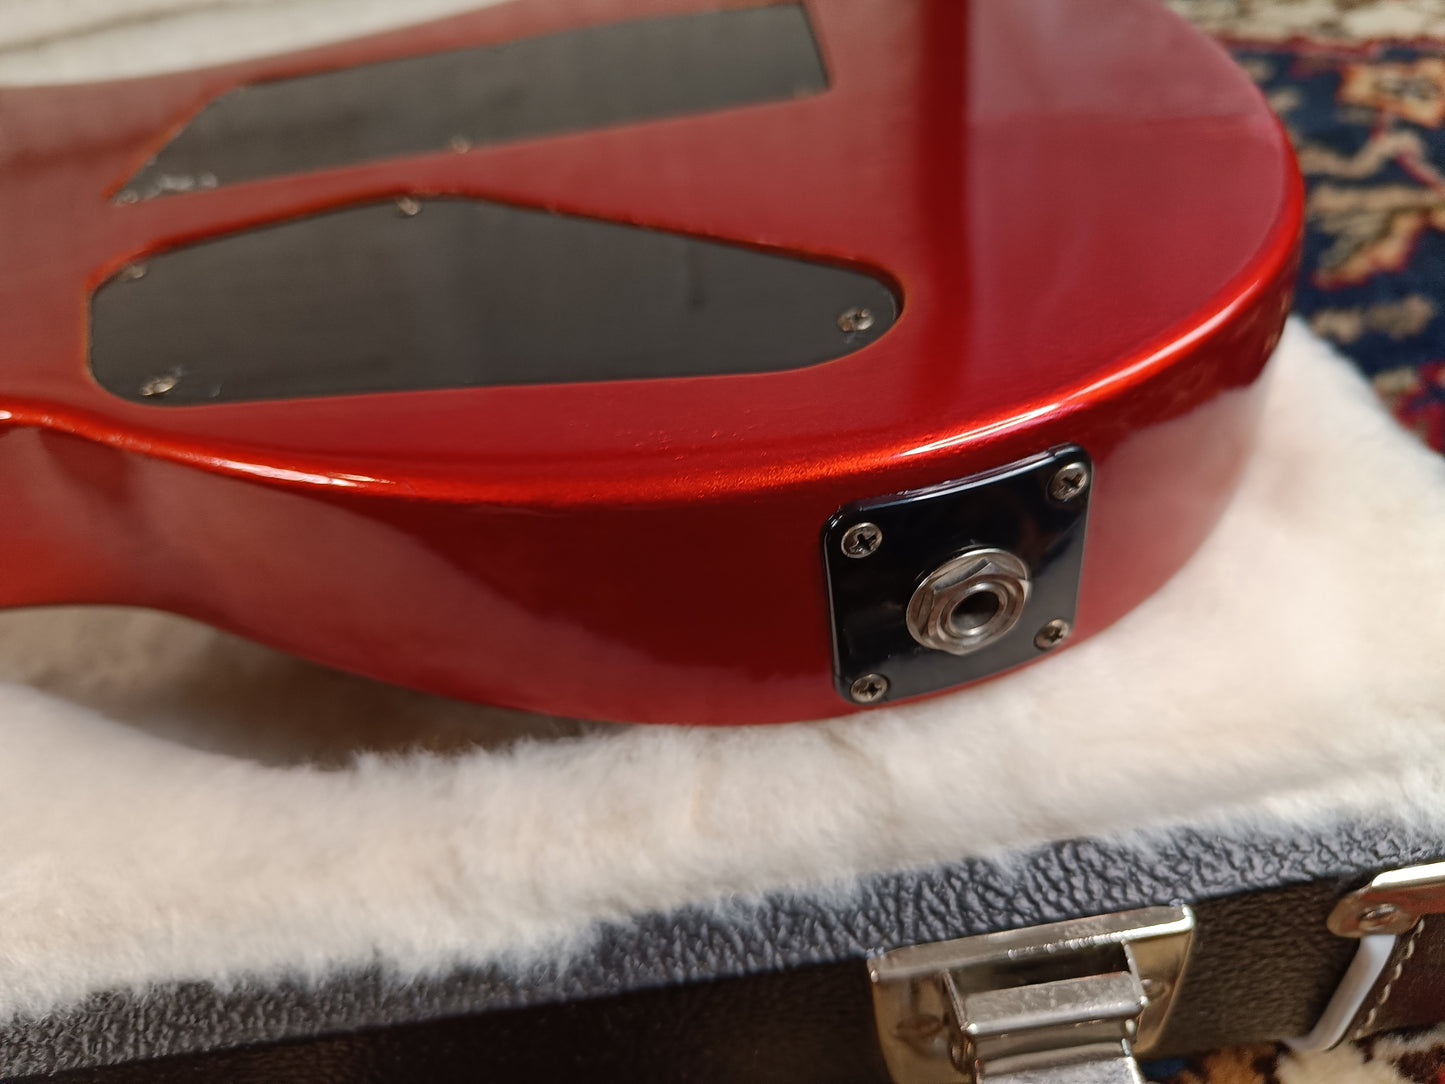 Gibson M-III 2013 Vibrant Red